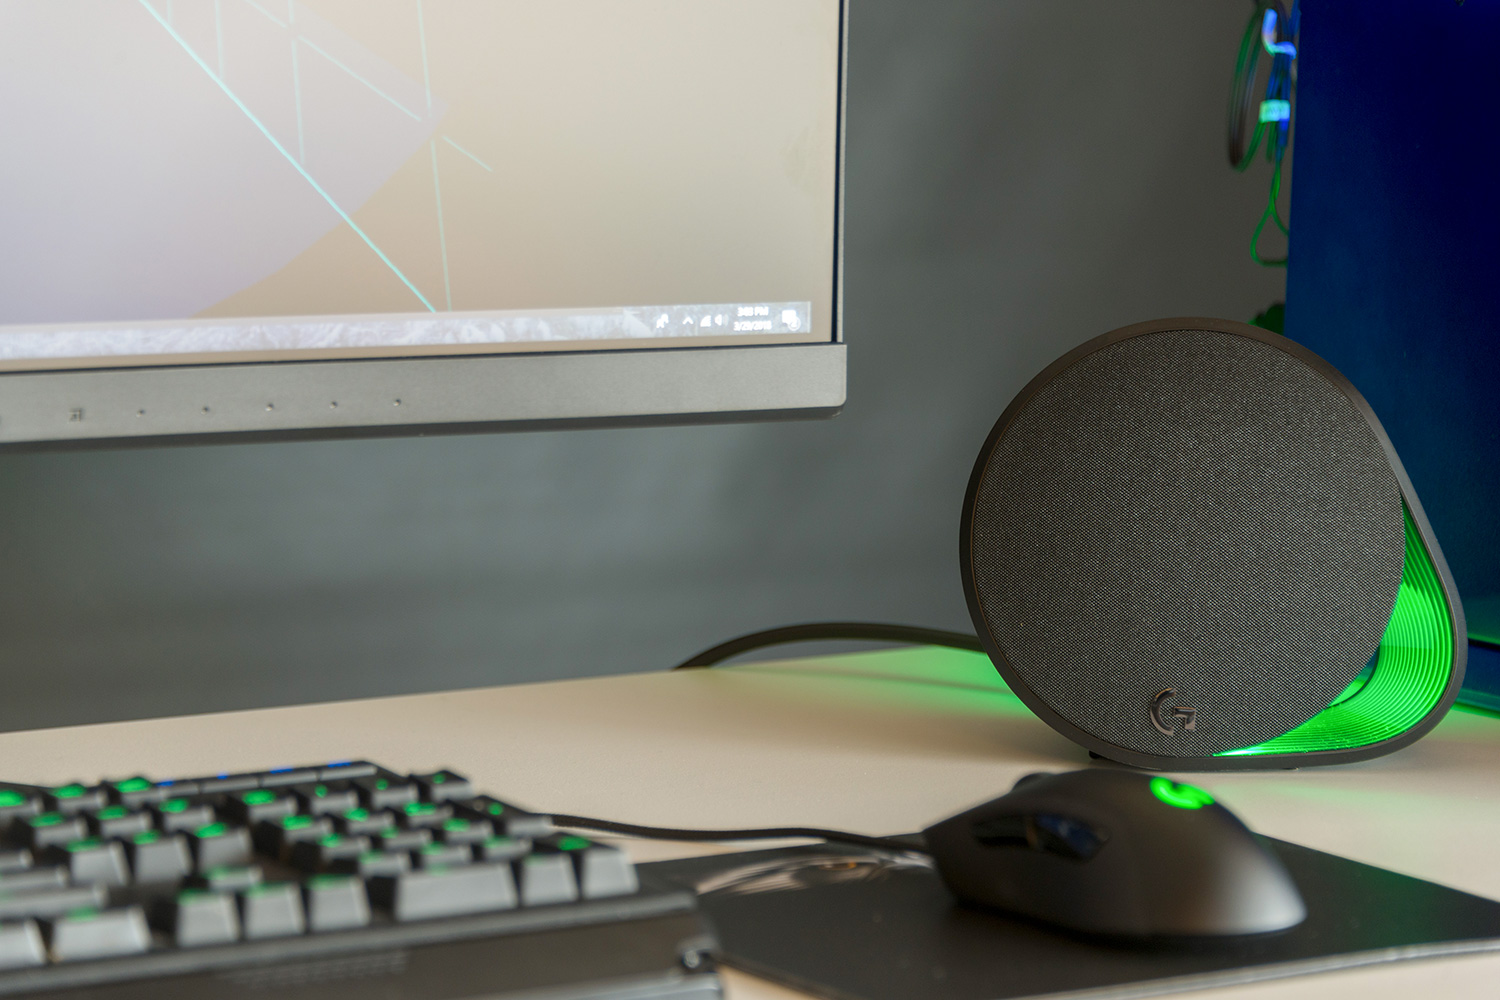 Logitech G560 Review: 2.1 RGB Gaming Speakers - PC Perspective